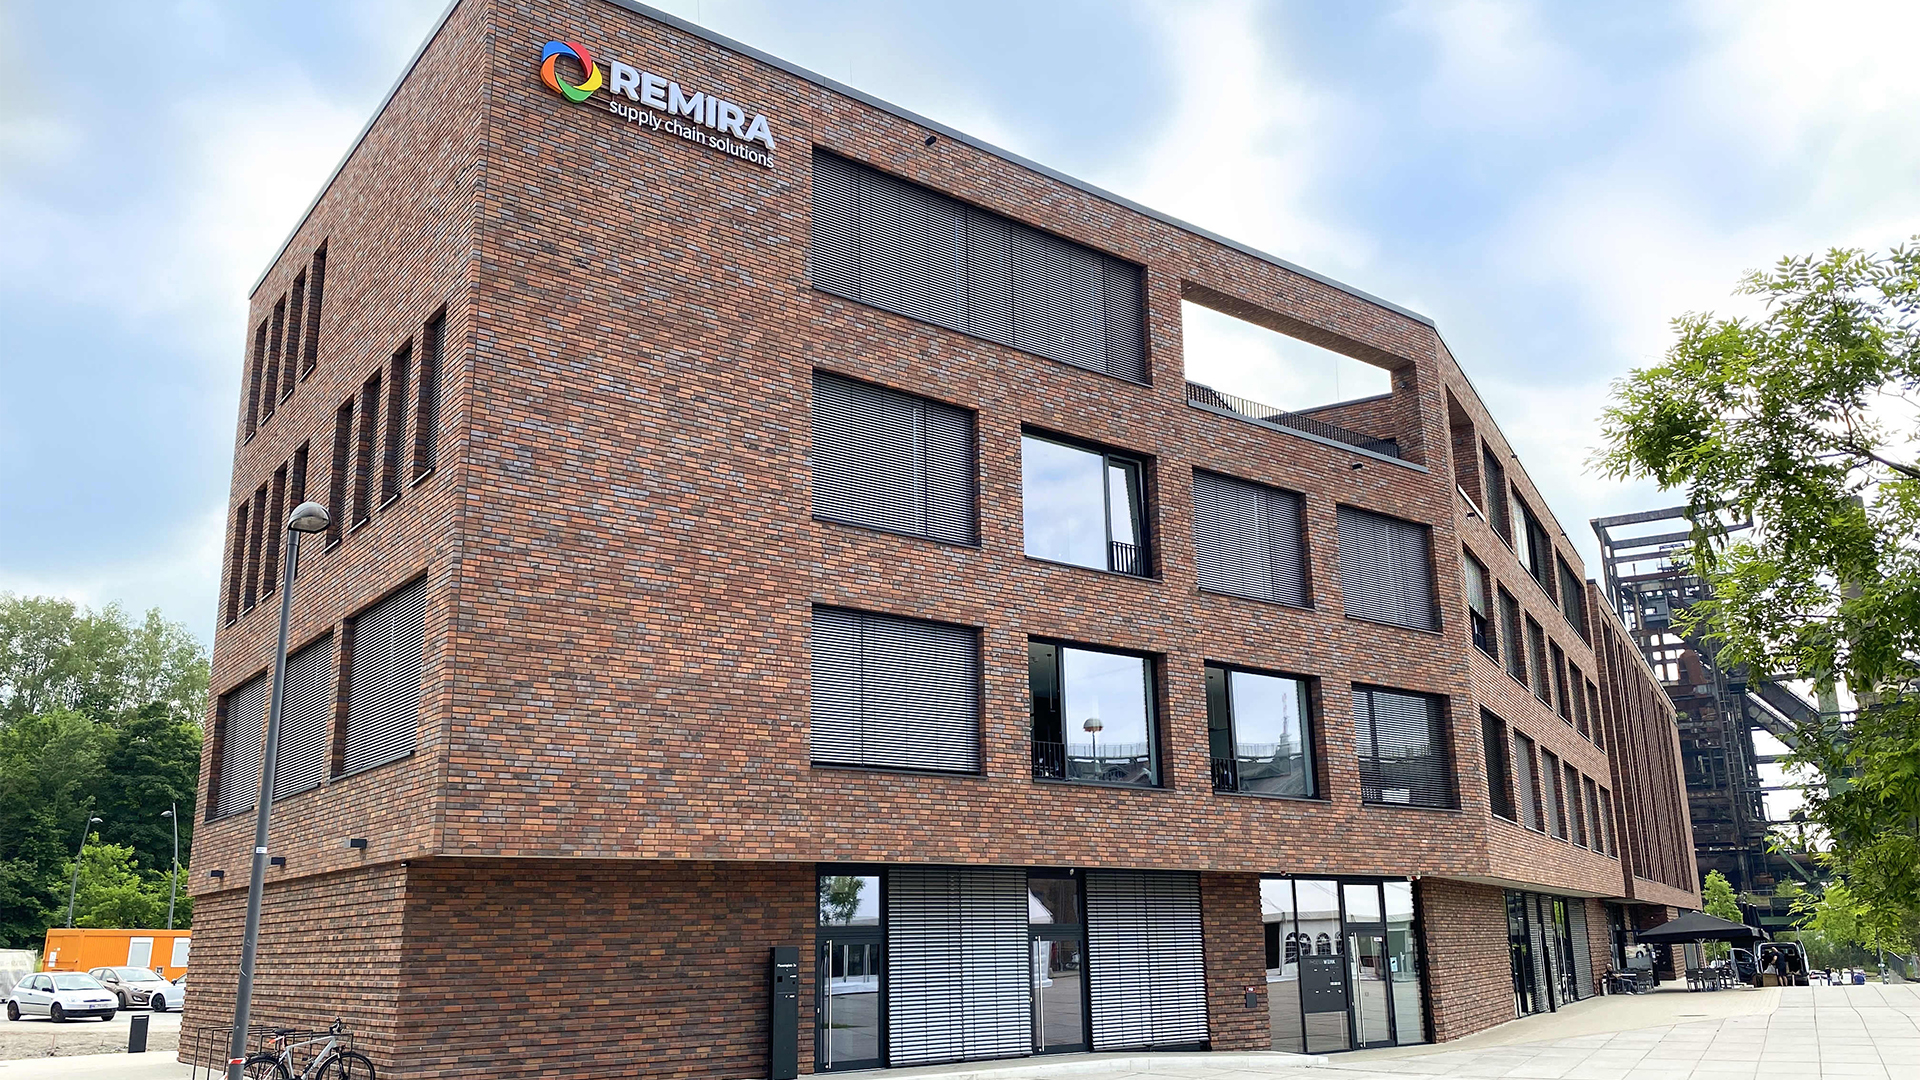 REMIRA building at the main location in Dortmund